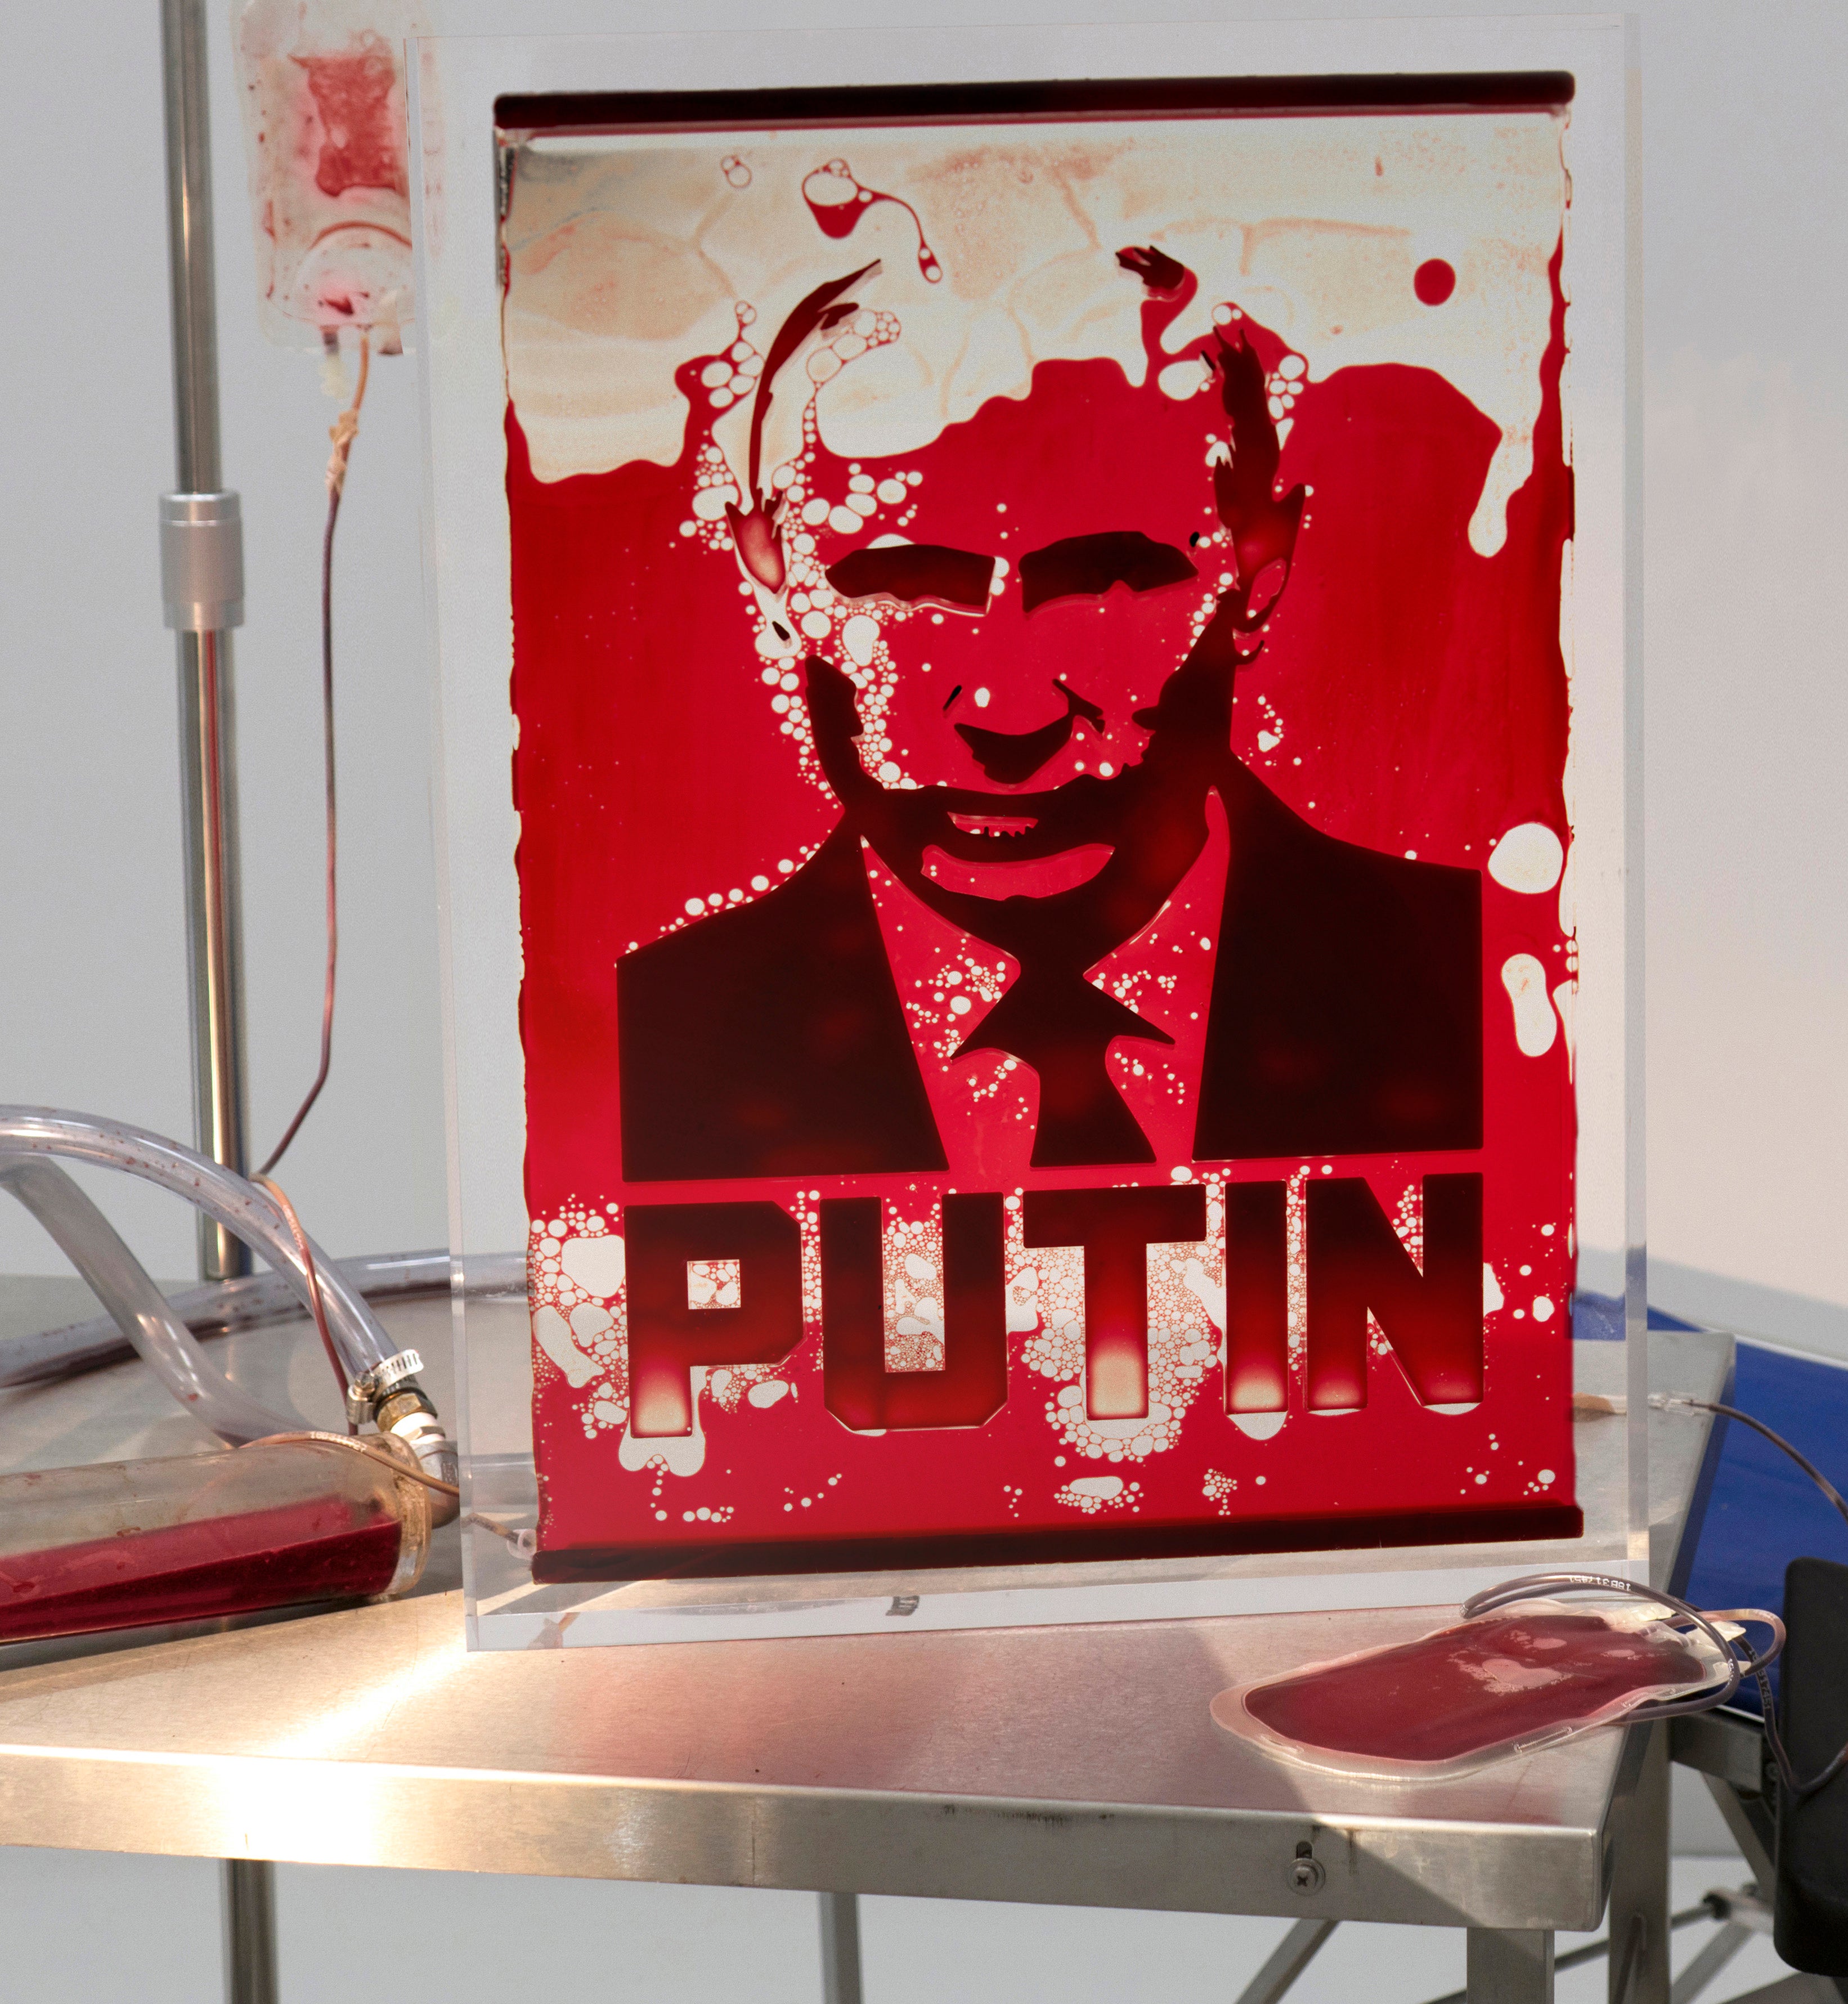 ‘Putin filled with blood’ is one of Andrei Molodkin’s previous works